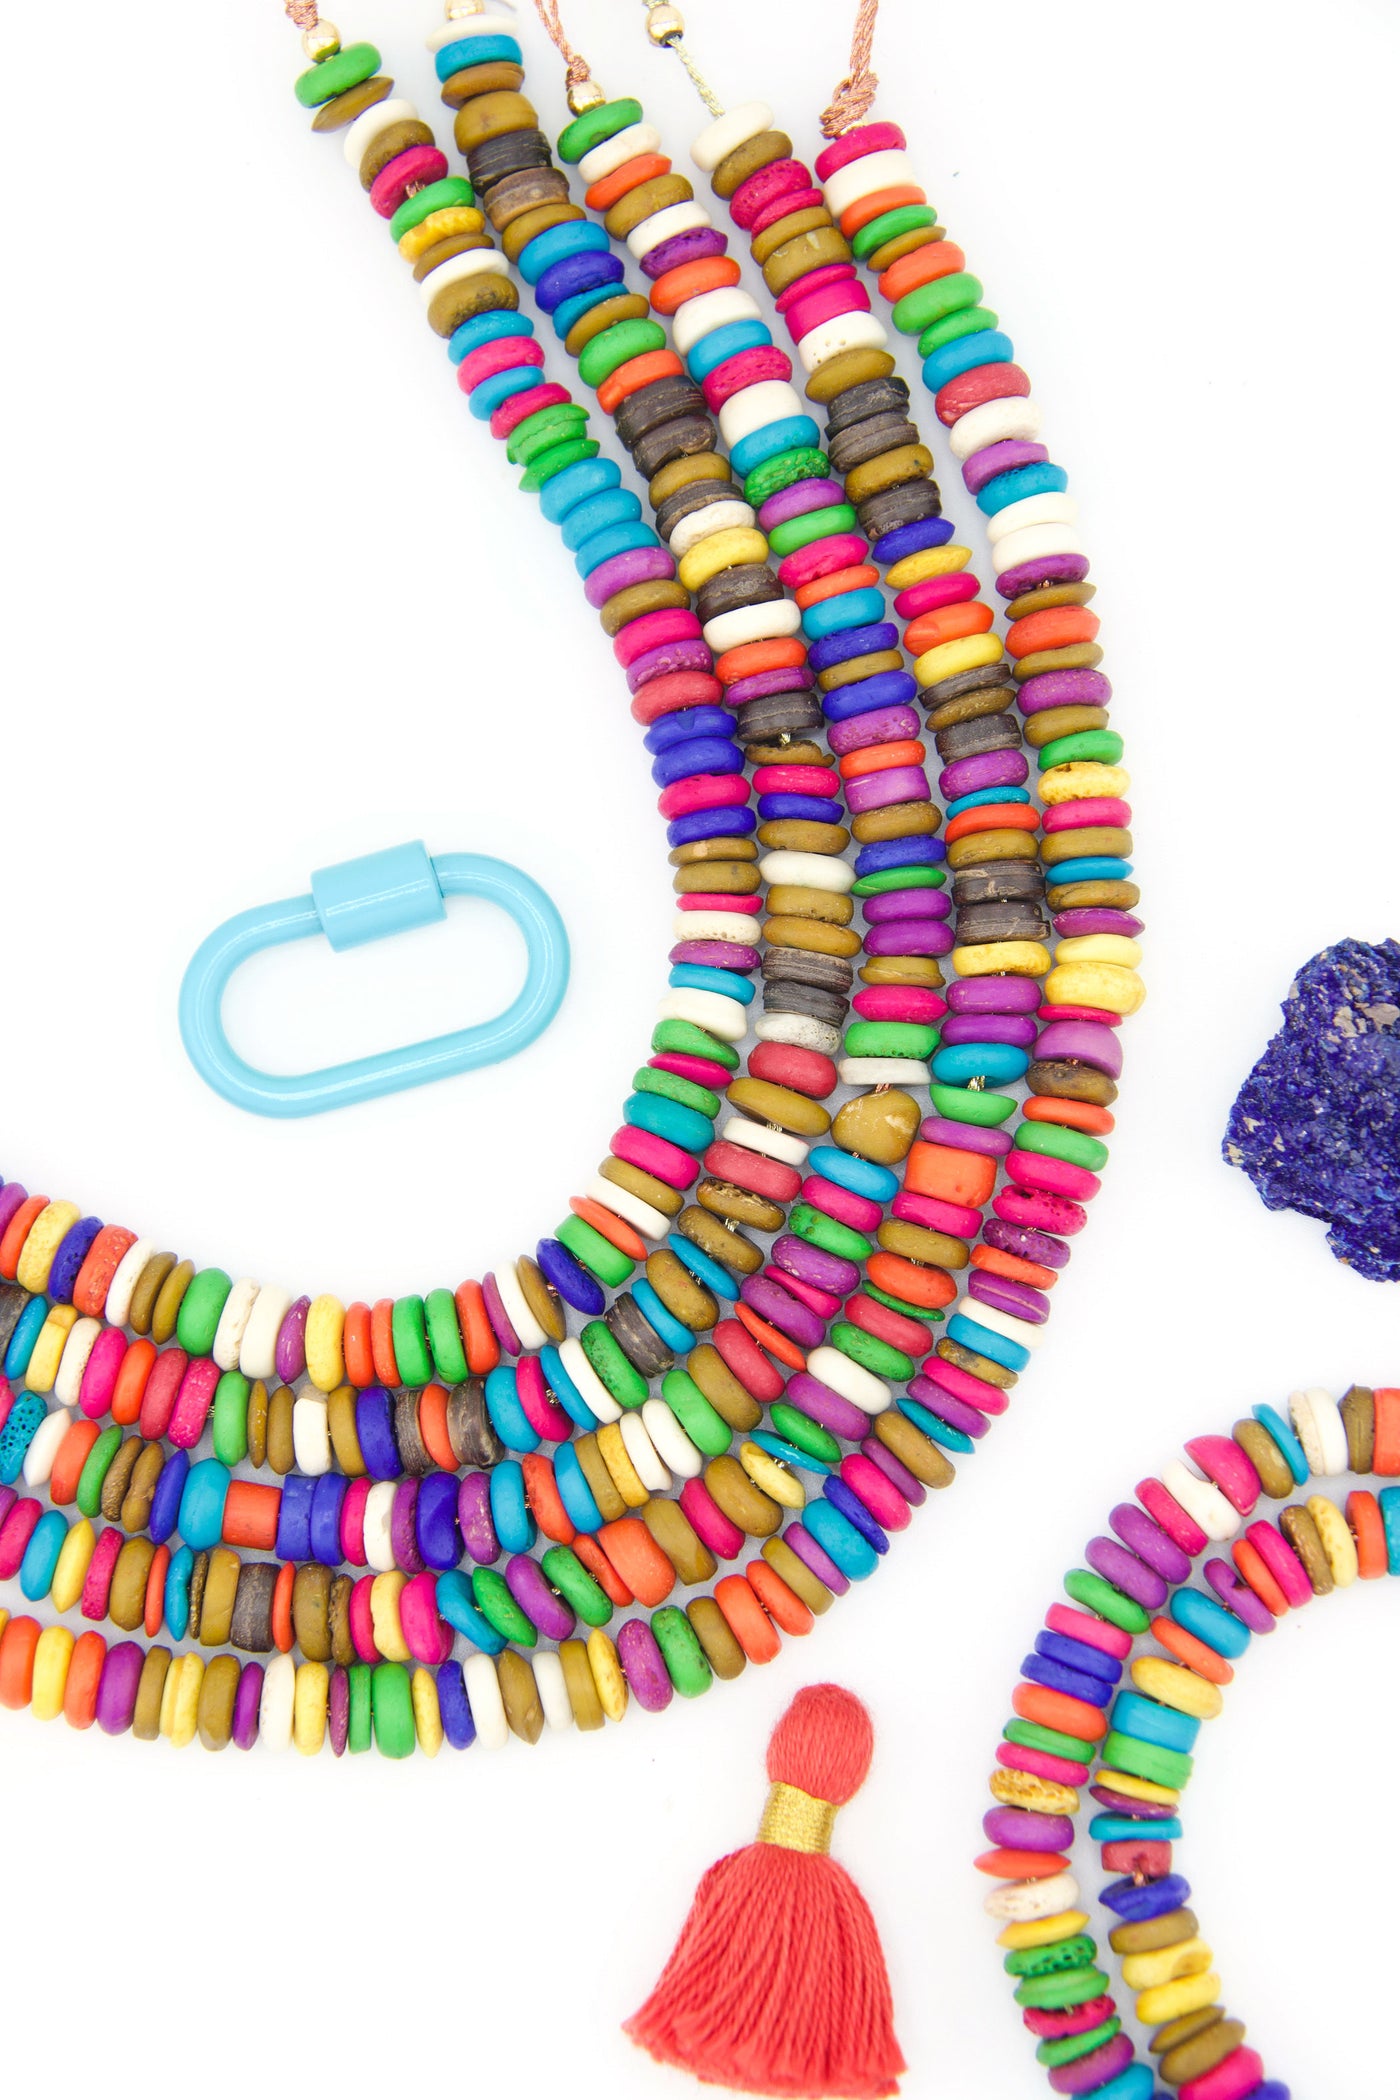 8-9mm Multi Color Natural Spacer Beads: Bright Heishi Discs for making friendship bracelets